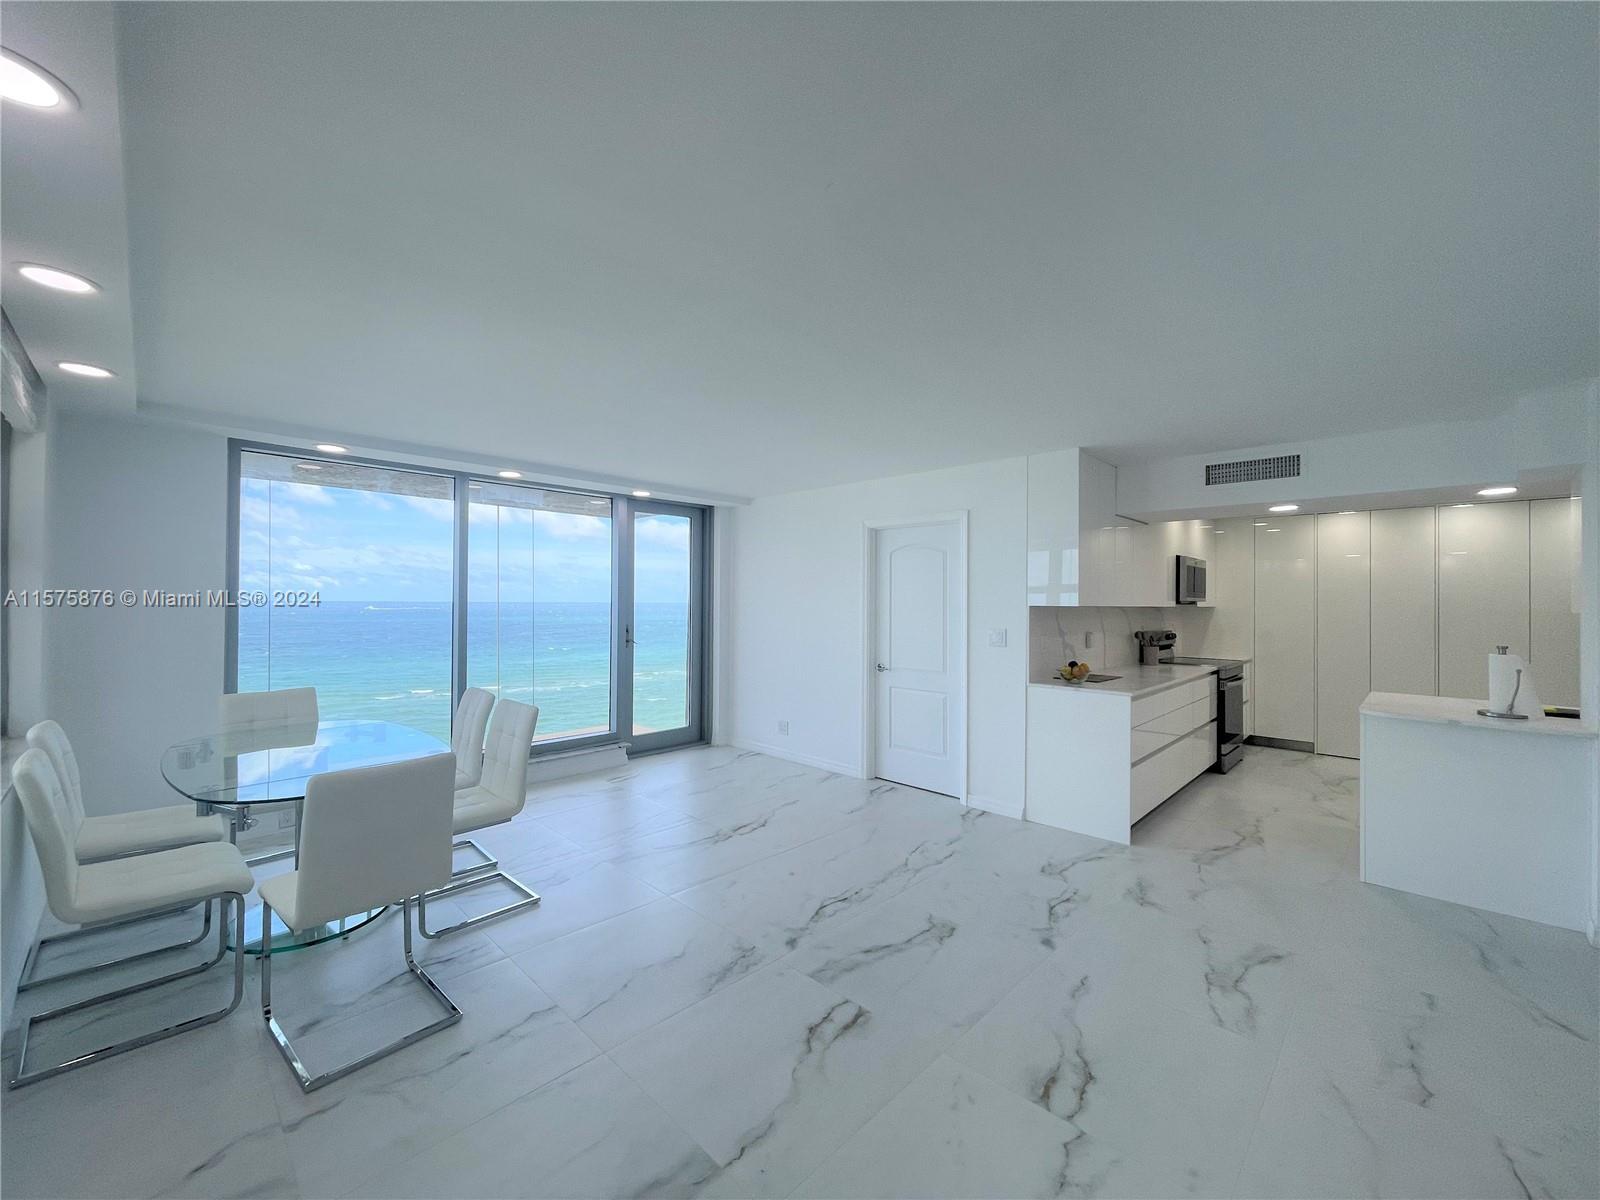 Completely renovated corner unit with direct ocean views, boasting a spacious 1955 sqft of living sp